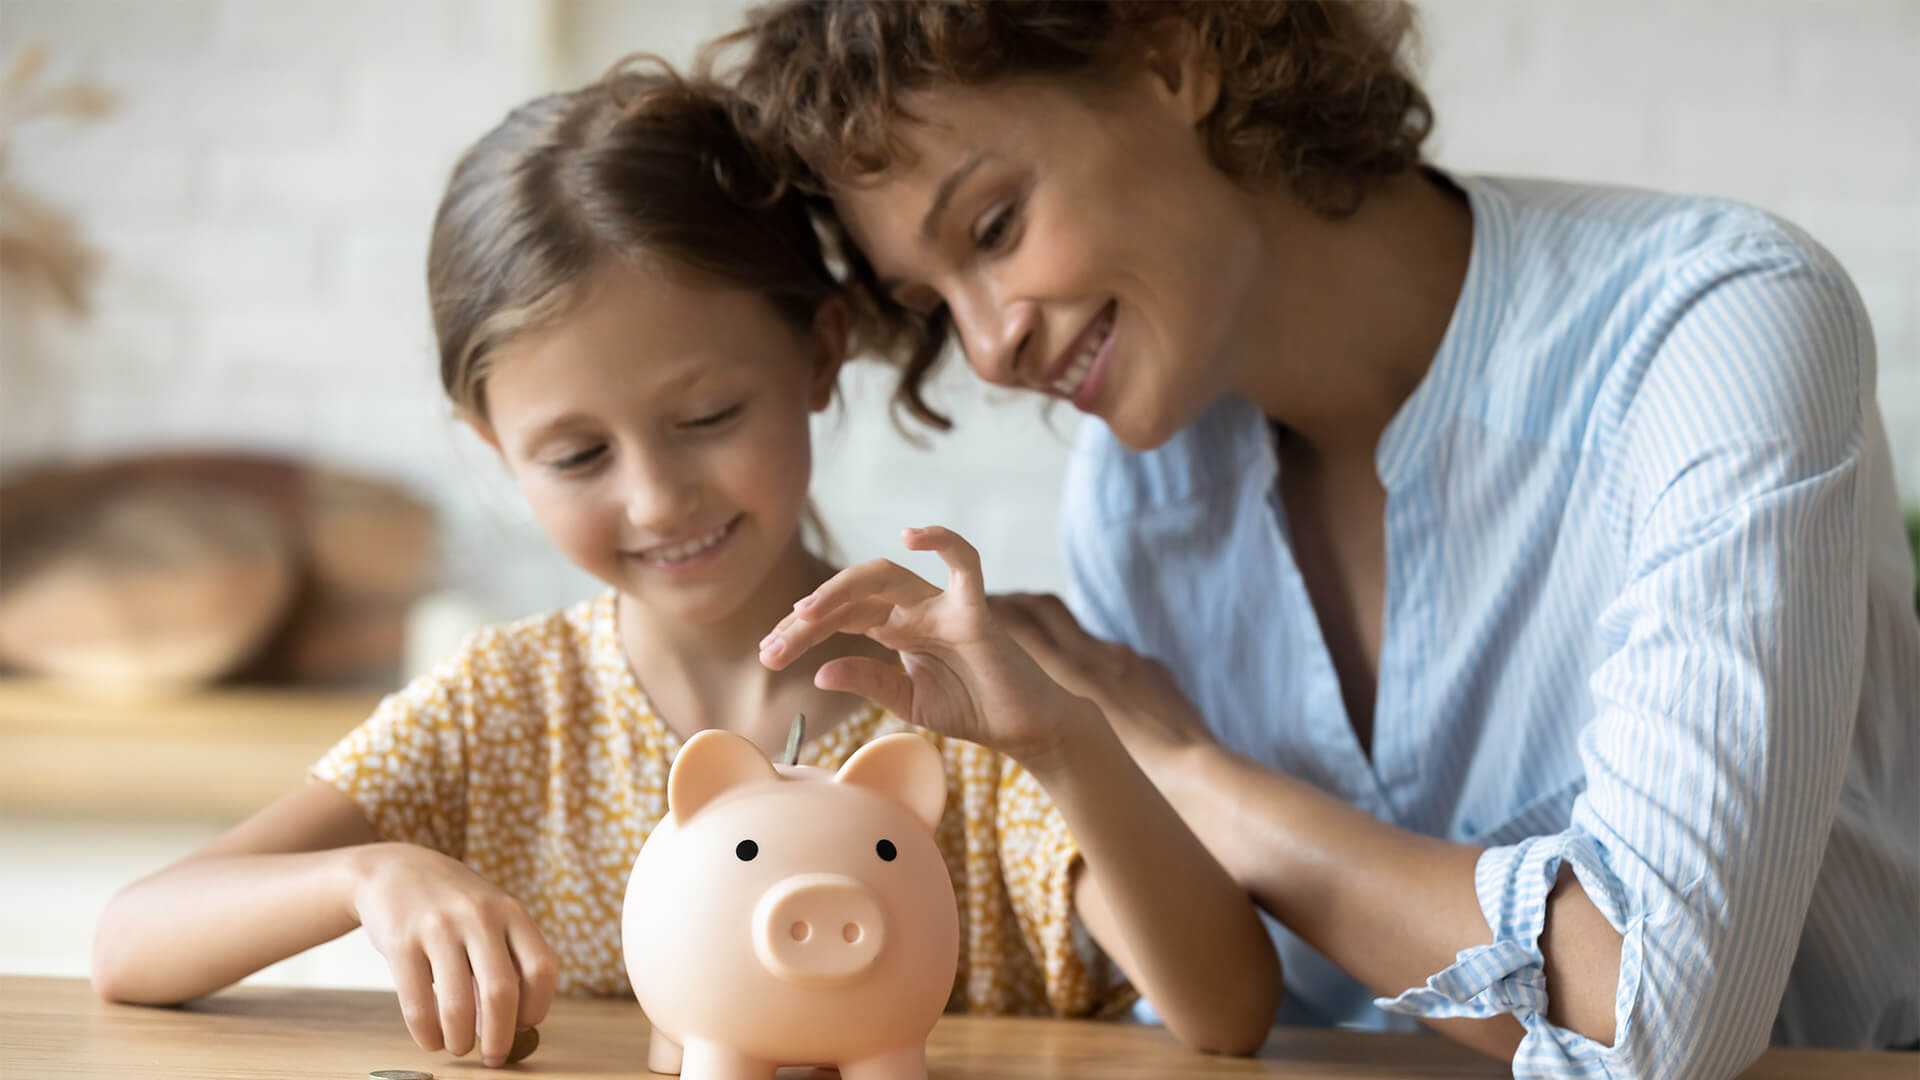 mother teaching small preschool kid daughter saving money or planning future purchases